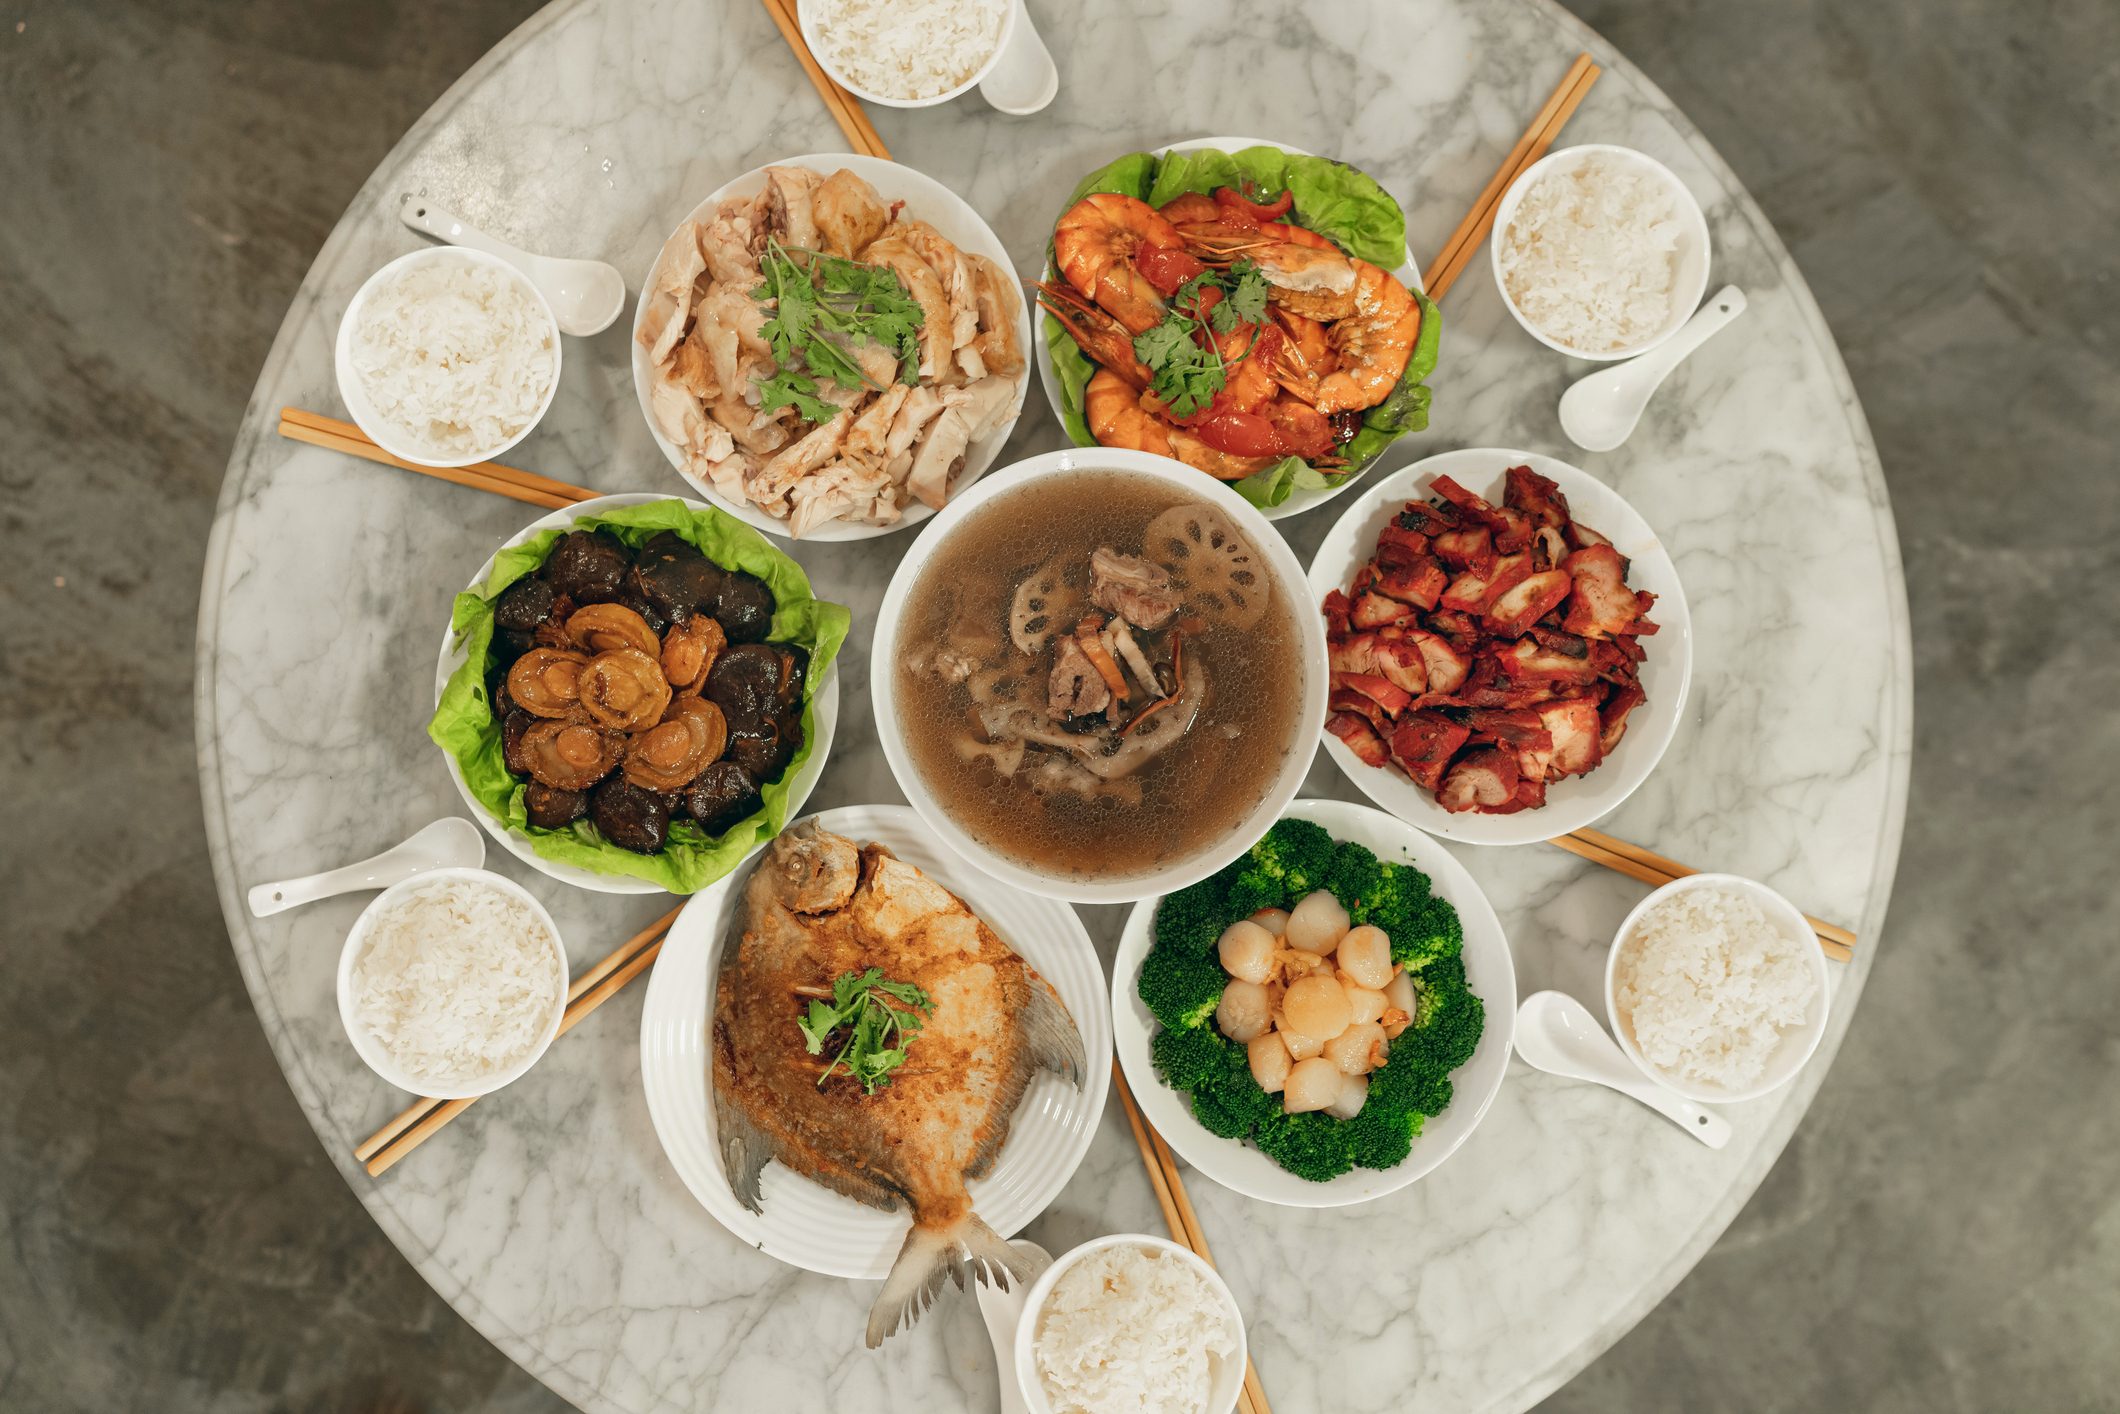 8 lucky foods to eat on Lunar New Year's Eve